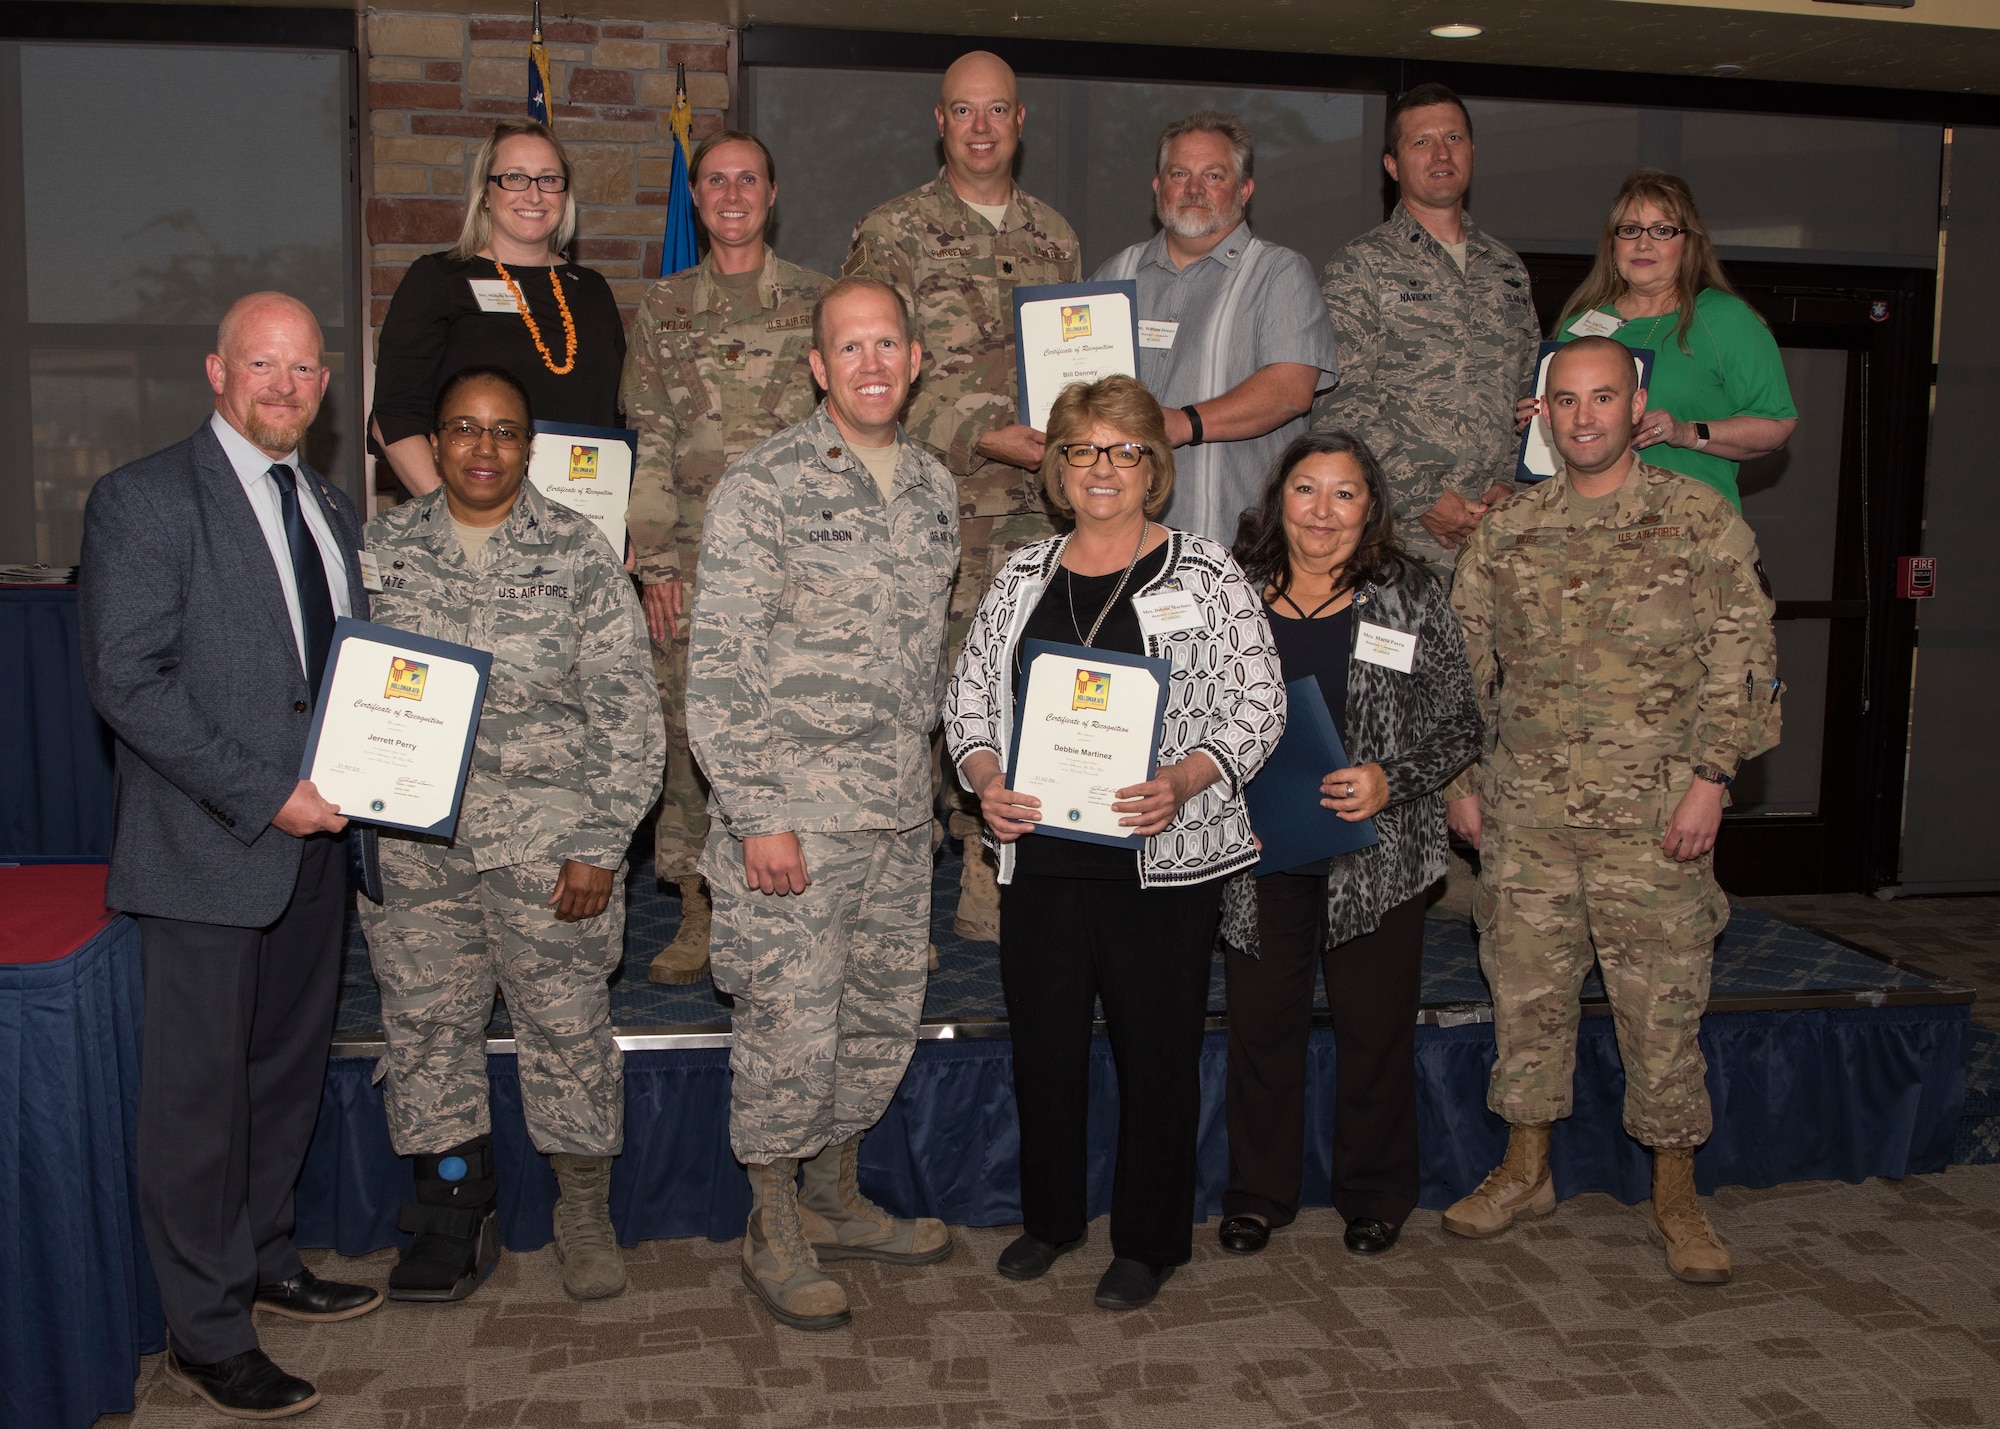 Commanders and honorary commanders from the 49th Mission Support Group pose for a photo, May 31, 2019, on Holloman Air Force Base, N.M. The honorary commander program establishes and maintains personal relationships with local civic leaders, and aids in increasing public awareness of the missions, policies and programs of the Department of Defense and United States Air Force. (U.S. Air Force photo by Staff Sgt. BreeAnn Sachs)